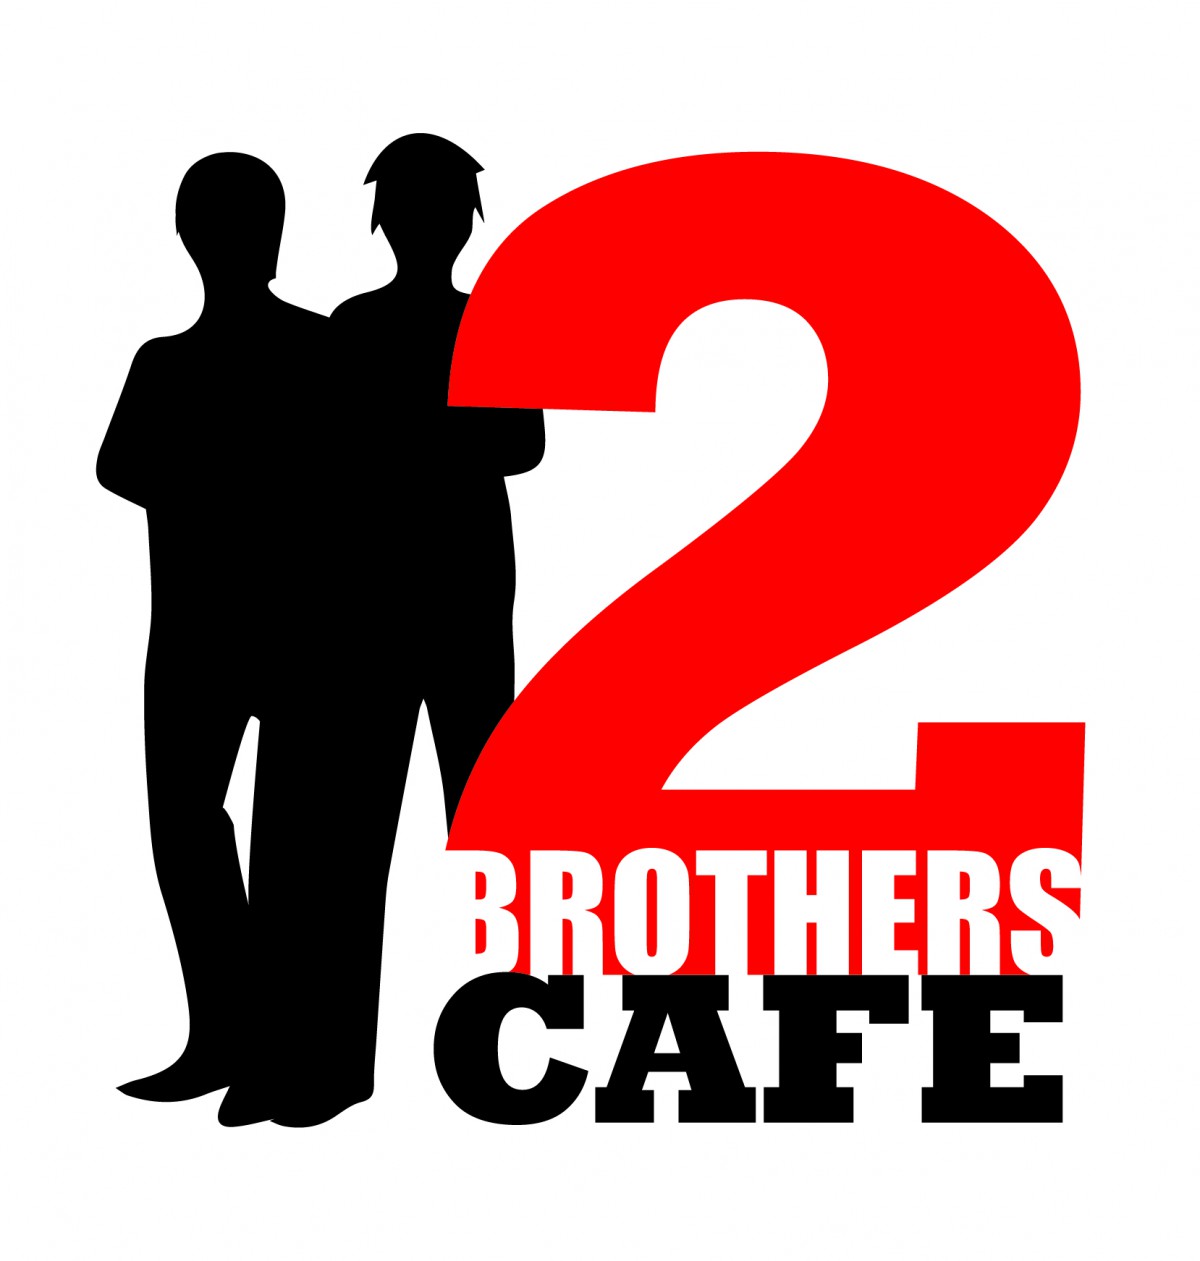 2 BROTHERS CAFE LOGO